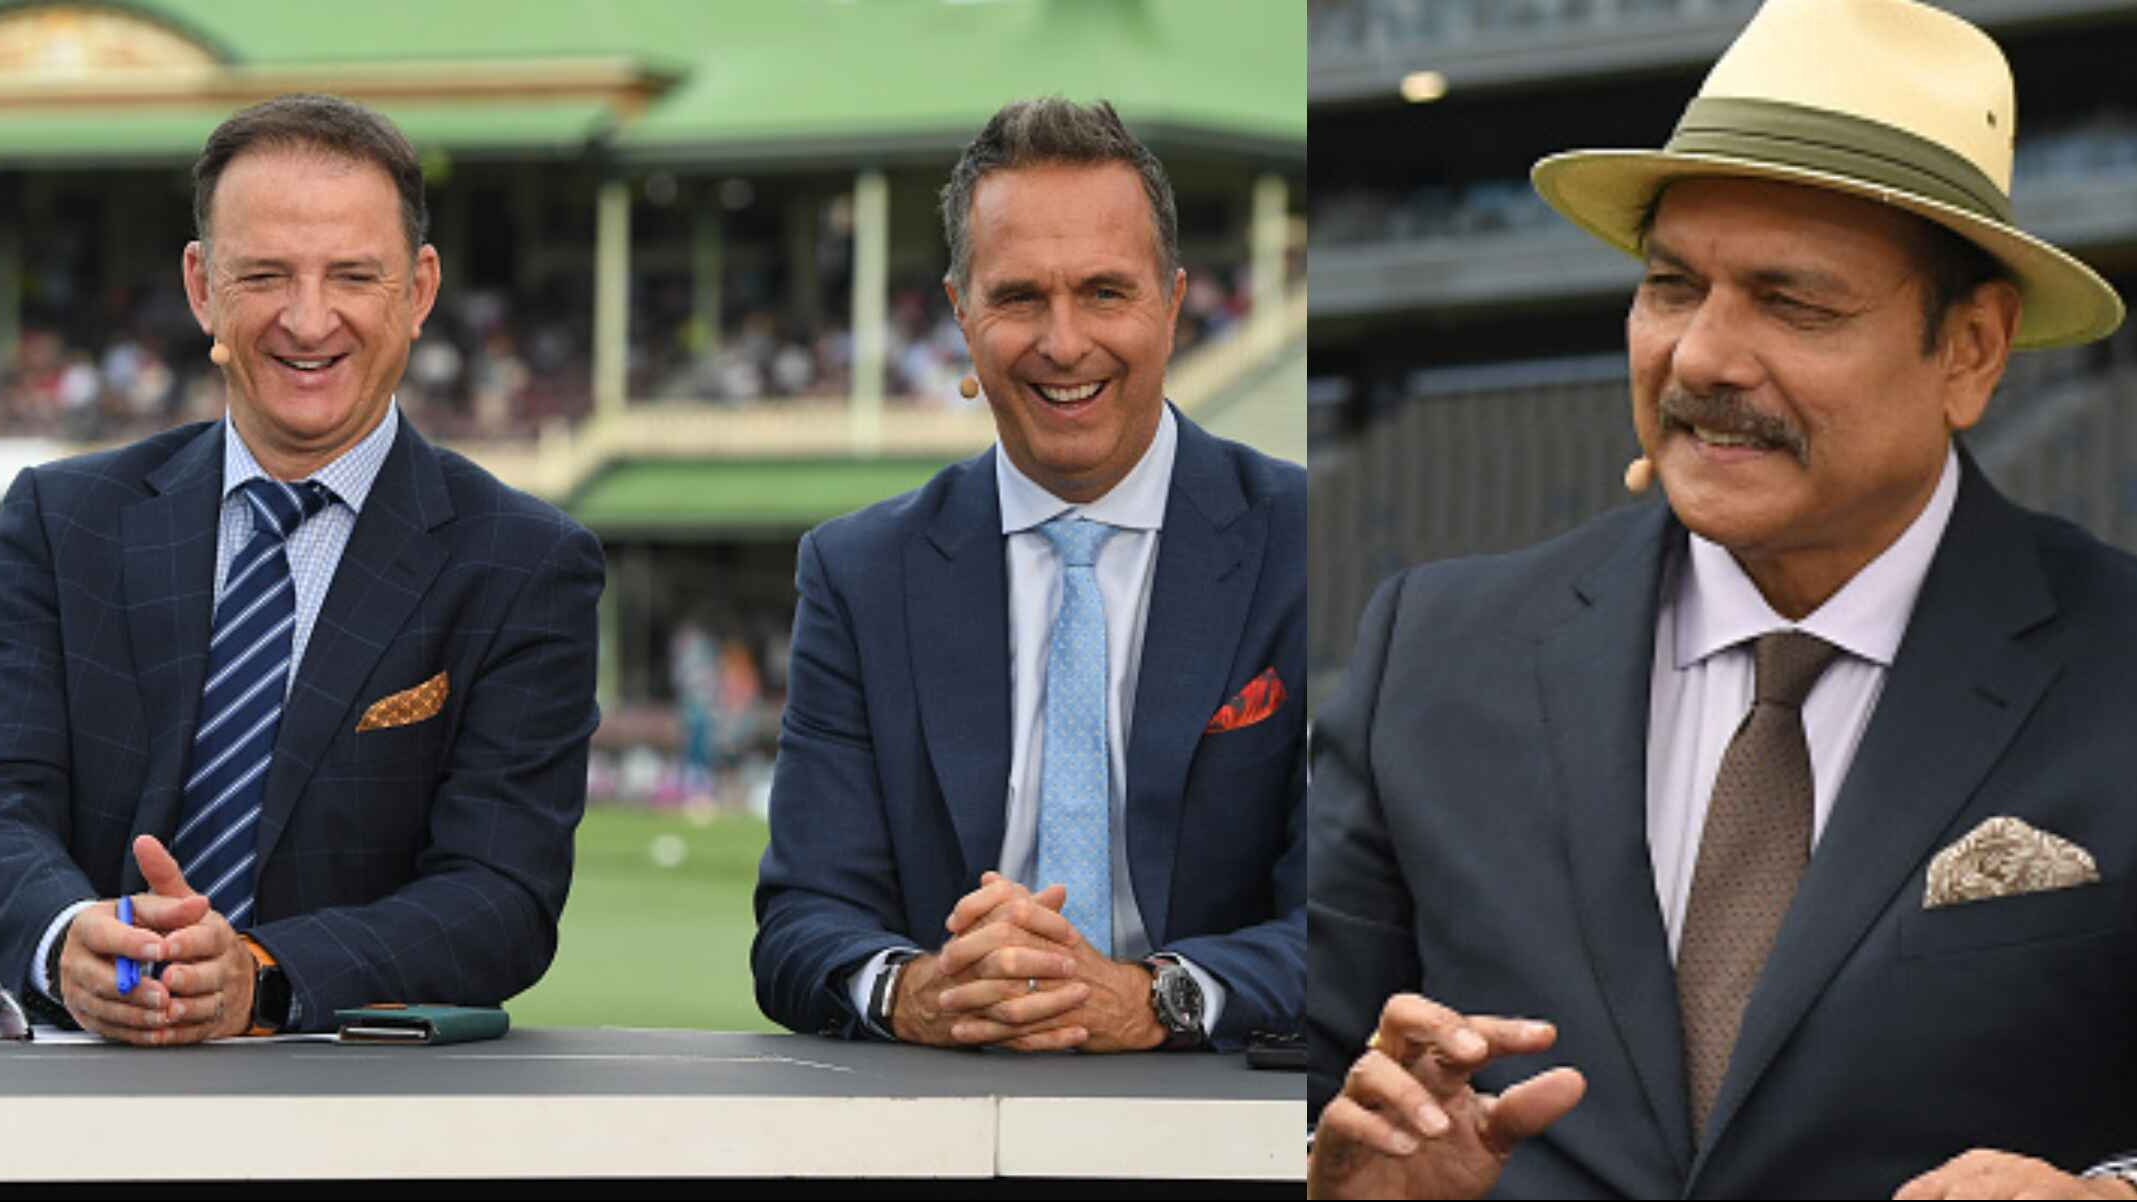 SA v IND 2023-24: WATCH- Mark Waugh, Michael Vaughan react to Ravi Shastri’s epic “dump” remark on India’s collapse